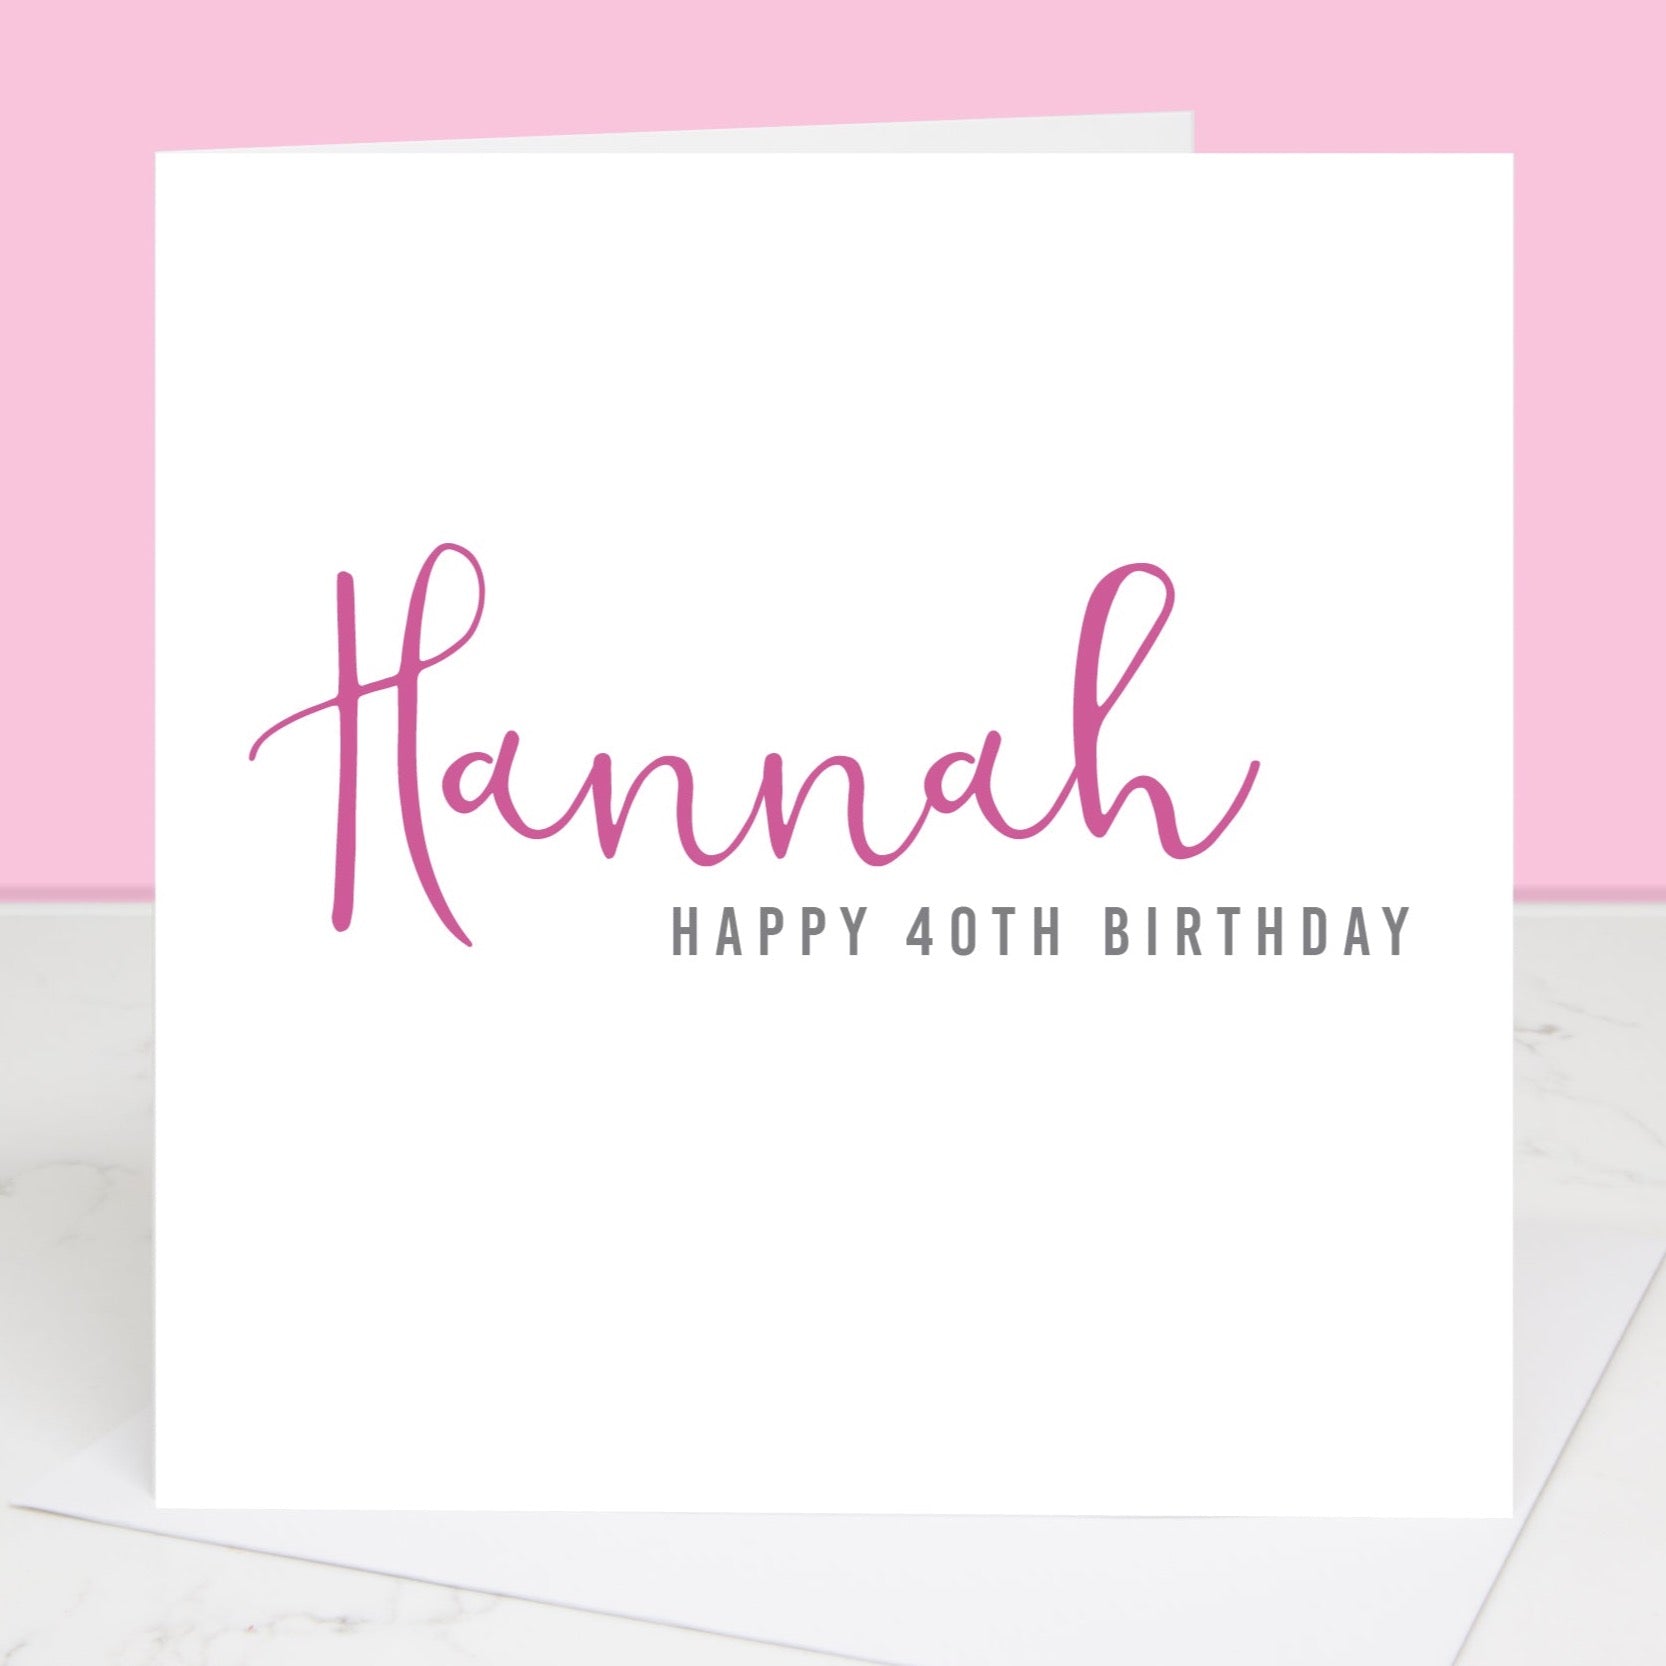 Happy Birthday card with their name in a calligraphy font All images and designs © Slice of Pie Designs 